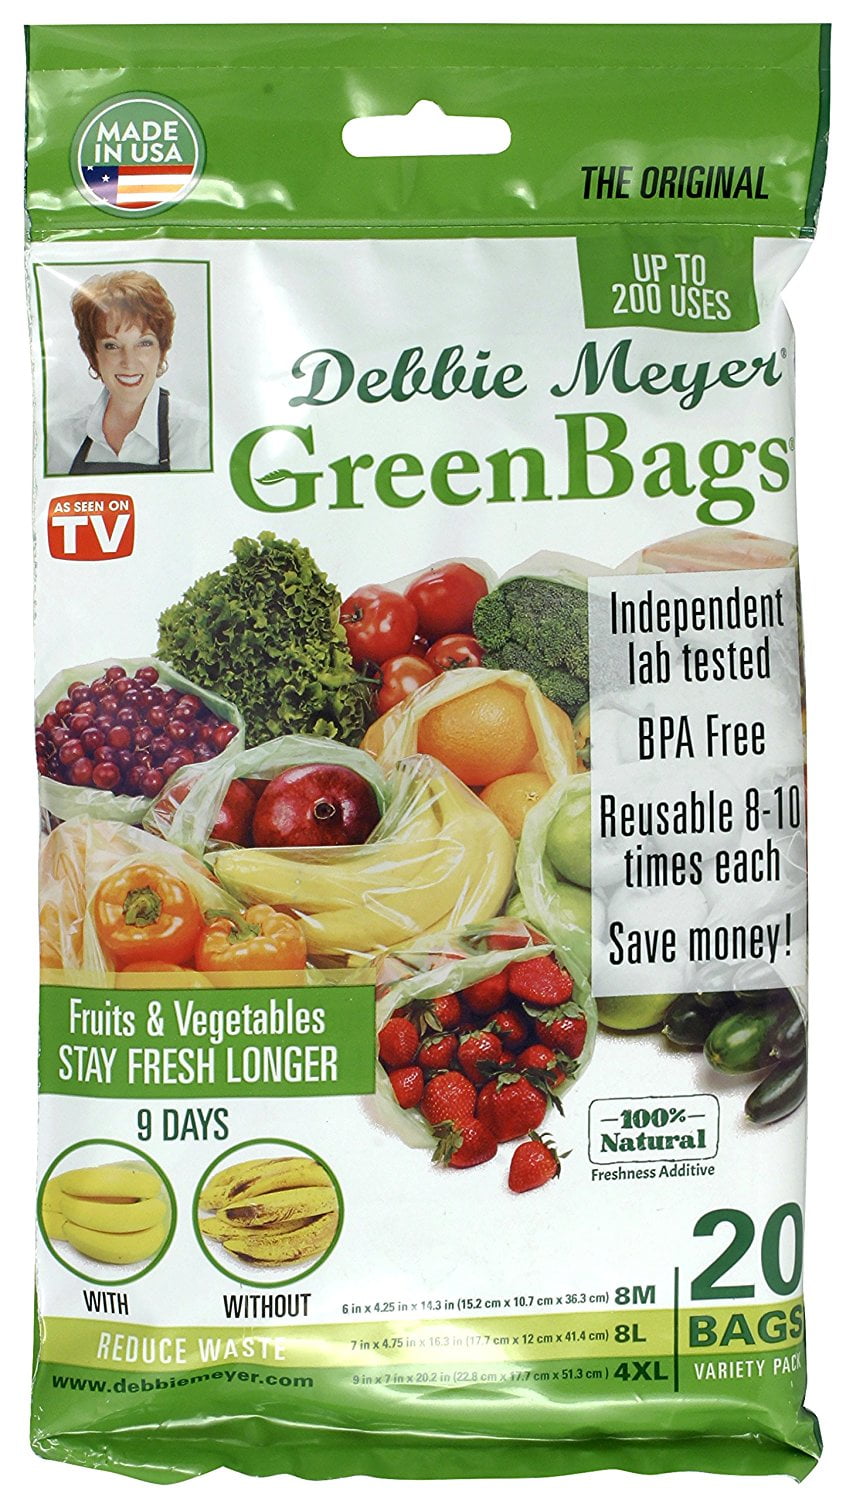 Debbie Meyer Green Boxes Fruits Square lot Of 4 Vegetables 4 cup 32oz 